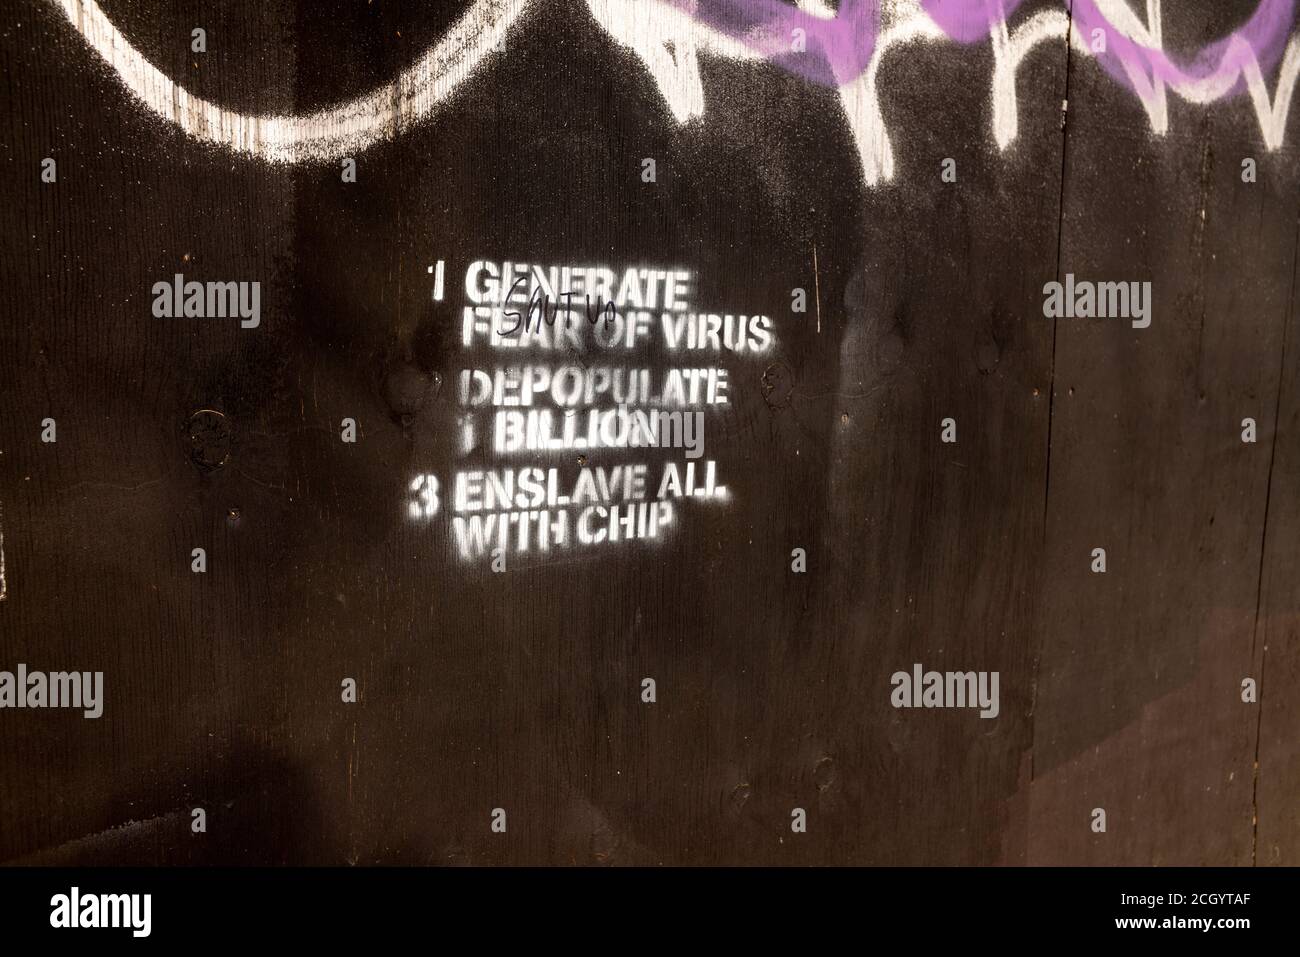 'Plandemic' Graffiti, Kirkstall Leeds West Yorkshire. Covid-19 Sceptics Enslave all with Chip. Stock Photo